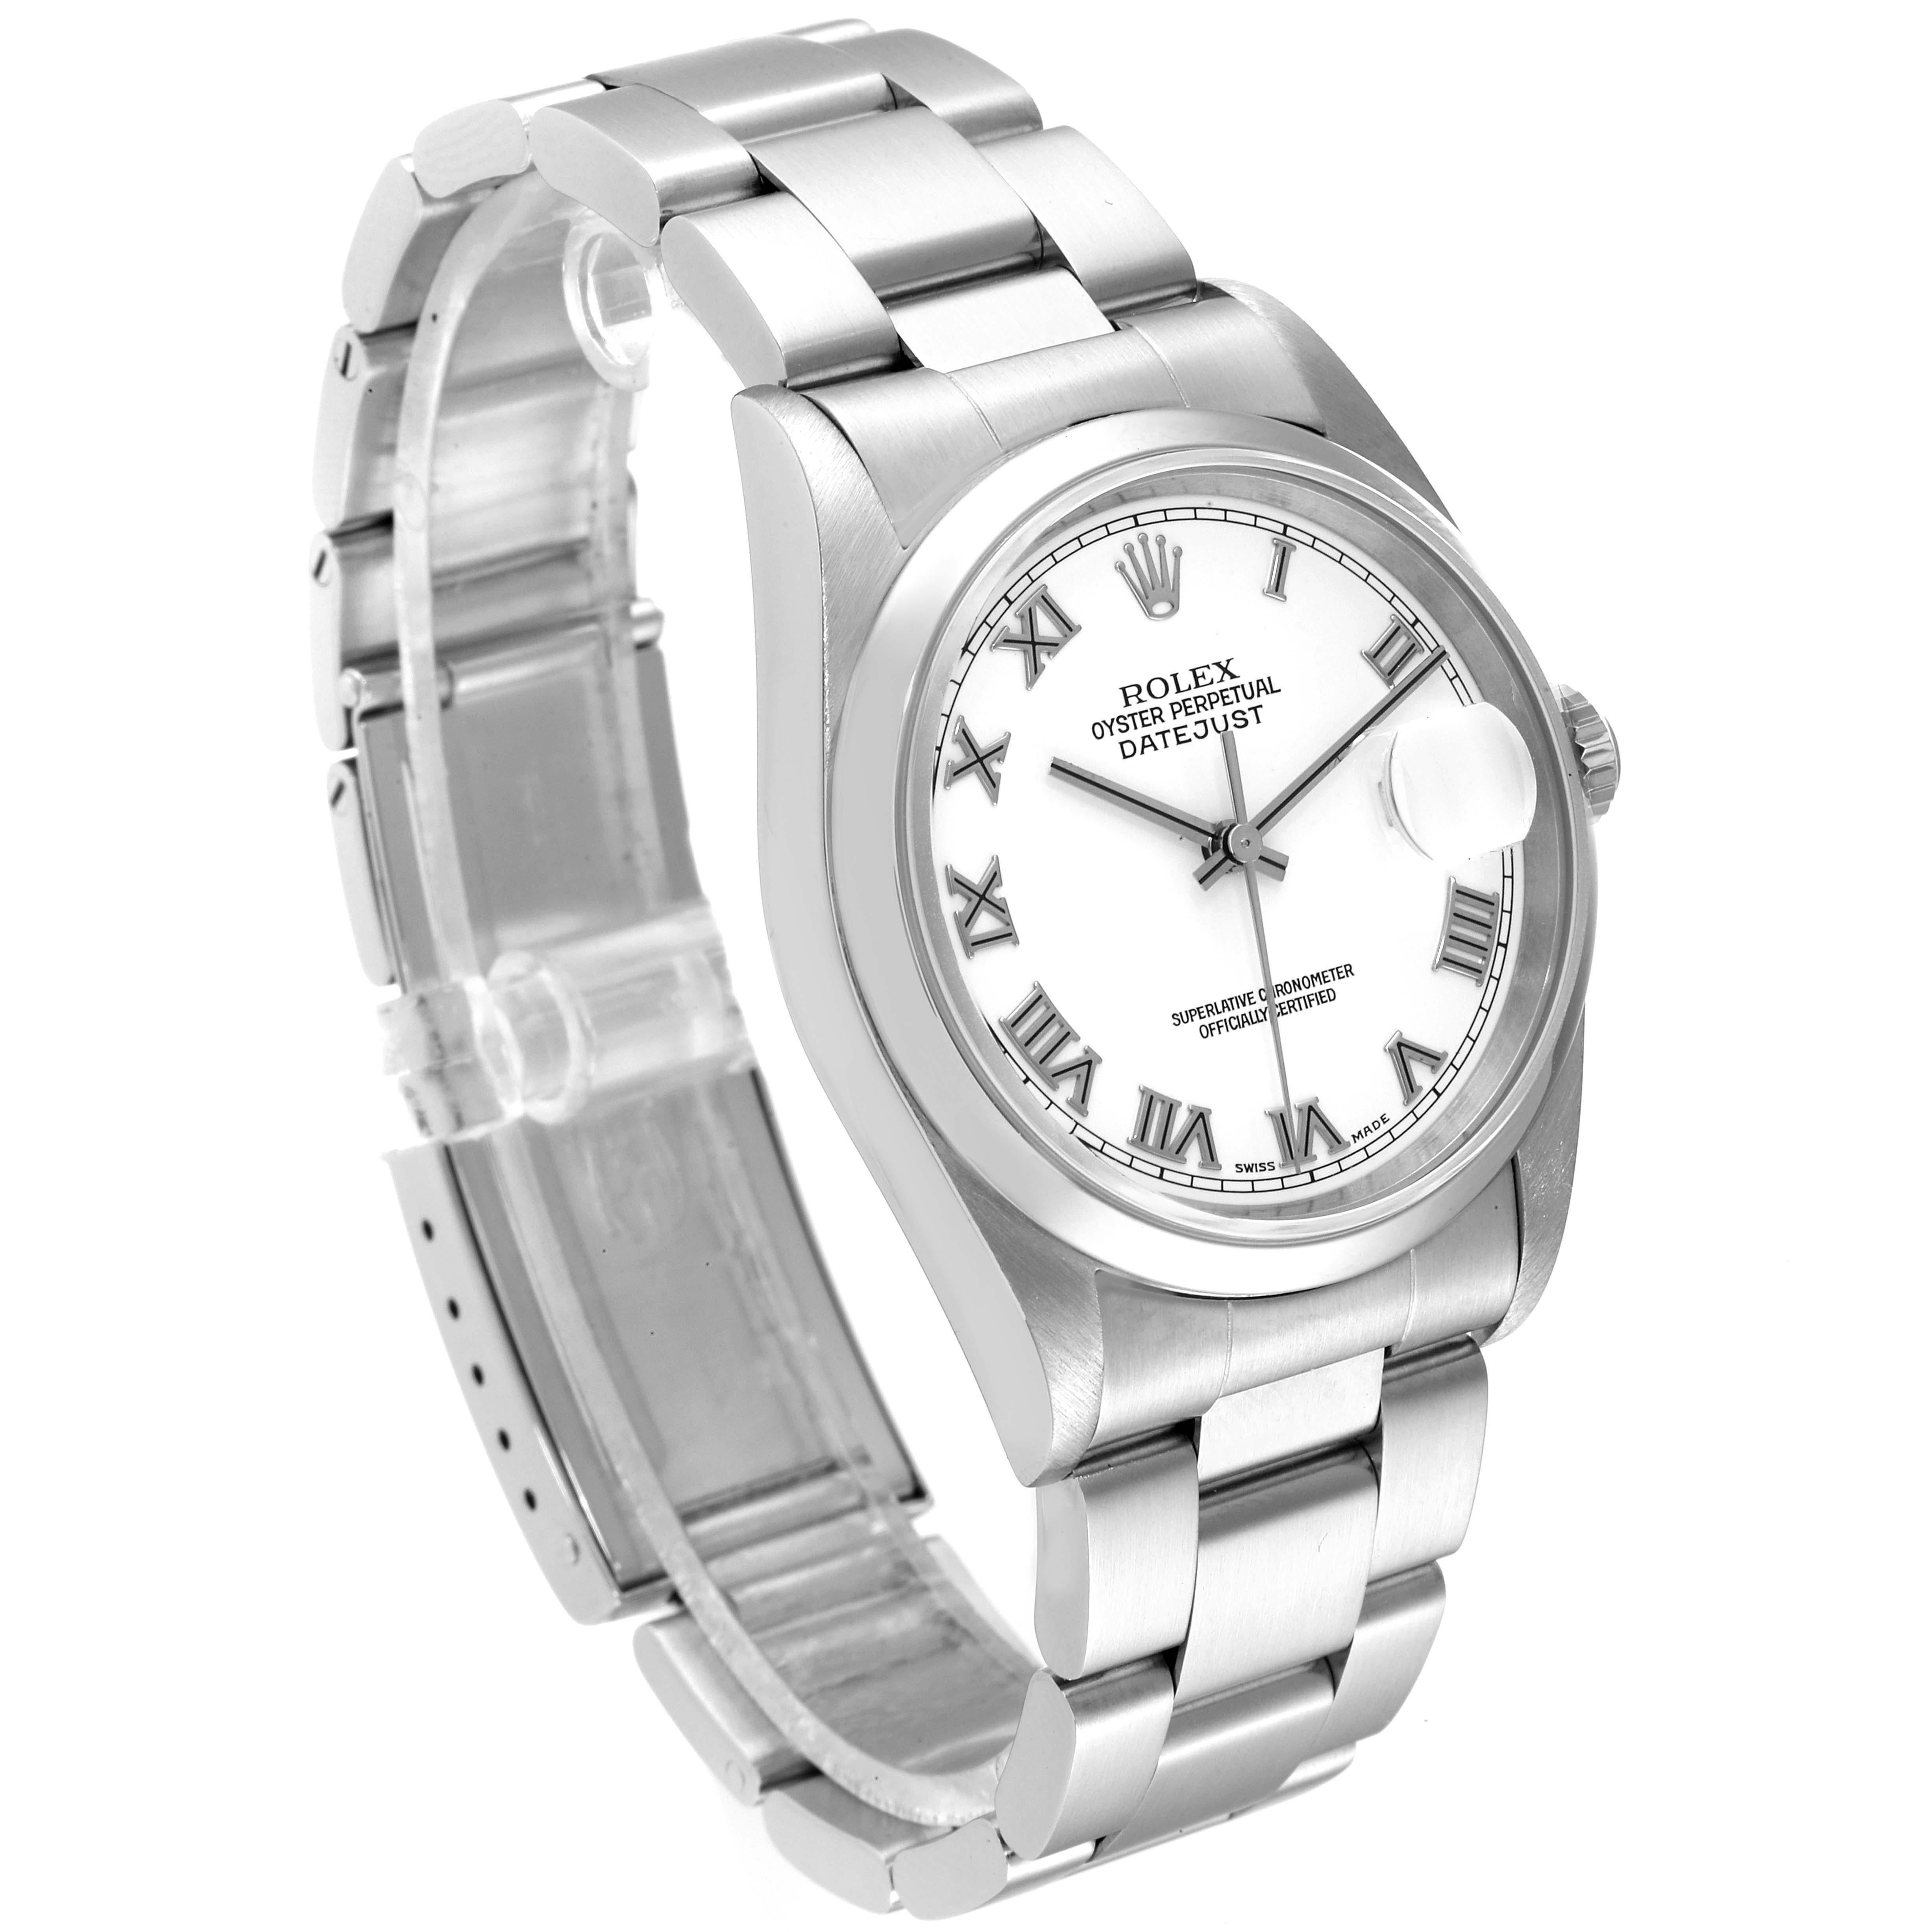 Rolex Datejust White Roman Dial Oyster Bracelet Steel Mens Watch 16200 In Excellent Condition For Sale In Atlanta, GA